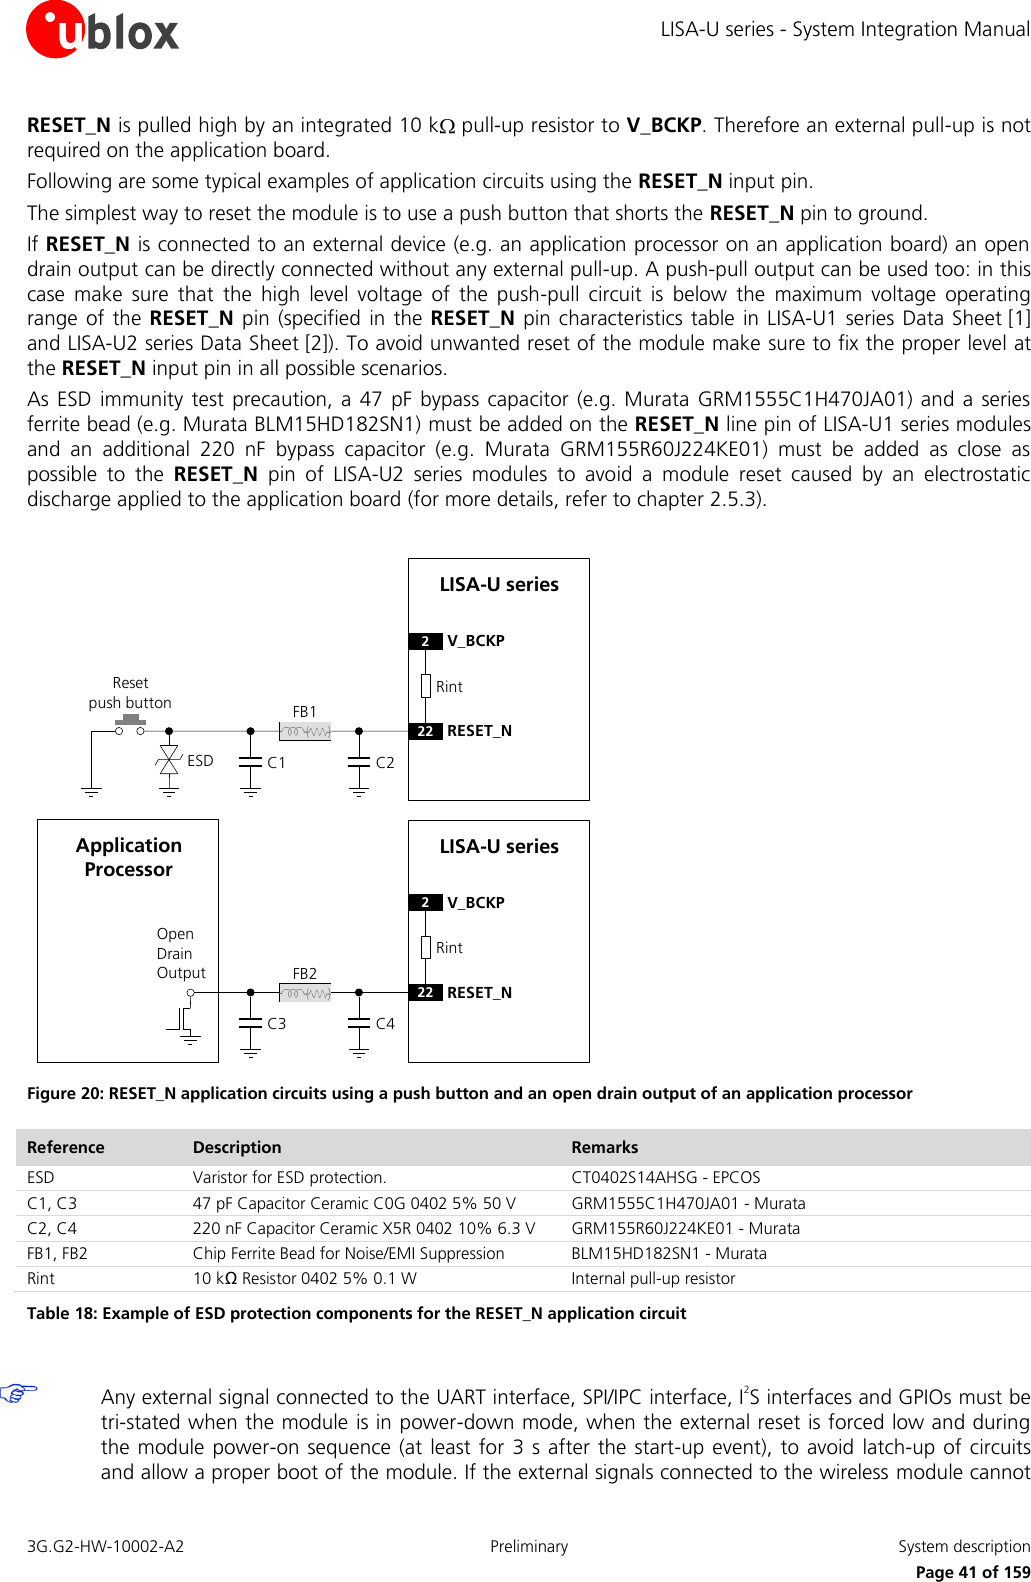 LISA-U series - System Integration Manual 3G.G2-HW-10002-A2  Preliminary  System description      Page 41 of 159 RESET_N is pulled high by an integrated 10 k  pull-up resistor to V_BCKP. Therefore an external pull-up is not required on the application board. Following are some typical examples of application circuits using the RESET_N input pin. The simplest way to reset the module is to use a push button that shorts the RESET_N pin to ground. If RESET_N is connected to an external device (e.g. an application processor on an application board) an open drain output can be directly connected without any external pull-up. A push-pull output can be used too: in this case  make  sure  that  the  high  level  voltage  of  the  push-pull  circuit  is  below  the  maximum  voltage  operating range of the RESET_N  pin (specified  in the  RESET_N pin characteristics table  in LISA-U1 series  Data Sheet [1] and LISA-U2 series Data Sheet [2]). To avoid unwanted reset of the module make sure to fix the proper level at the RESET_N input pin in all possible scenarios. As ESD  immunity test  precaution,  a 47  pF  bypass capacitor  (e.g. Murata  GRM1555C1H470JA01) and a  series ferrite bead (e.g. Murata BLM15HD182SN1) must be added on the RESET_N line pin of LISA-U1 series modules and  an  additional  220  nF  bypass  capacitor  (e.g.  Murata  GRM155R60J224KE01)  must  be  added  as  close  as possible  to  the  RESET_N  pin  of  LISA-U2  series  modules  to  avoid  a  module  reset  caused  by  an  electrostatic discharge applied to the application board (for more details, refer to chapter 2.5.3).  LISA-U series2V_BCKP22 RESET_NReset     push buttonESDOpen Drain OutputApplication ProcessorLISA-U series2V_BCKP22 RESET_NRintRintFB1C1FB2C3C2C4 Figure 20: RESET_N application circuits using a push button and an open drain output of an application processor Reference Description Remarks ESD Varistor for ESD protection. CT0402S14AHSG - EPCOS C1, C3 47 pF Capacitor Ceramic C0G 0402 5% 50 V GRM1555C1H470JA01 - Murata C2, C4 220 nF Capacitor Ceramic X5R 0402 10% 6.3 V GRM155R60J224KE01 - Murata FB1, FB2 Chip Ferrite Bead for Noise/EMI Suppression BLM15HD182SN1 - Murata Rint 10 kΩ Resistor 0402 5% 0.1 W Internal pull-up resistor Table 18: Example of ESD protection components for the RESET_N application circuit   Any external signal connected to the UART interface, SPI/IPC interface, I2S interfaces and GPIOs must be tri-stated when the module is in power-down mode, when the external reset is forced low and during the module power-on sequence (at least  for 3  s  after the start-up event), to avoid  latch-up of circuits and allow a proper boot of the module. If the external signals connected to the wireless module cannot 